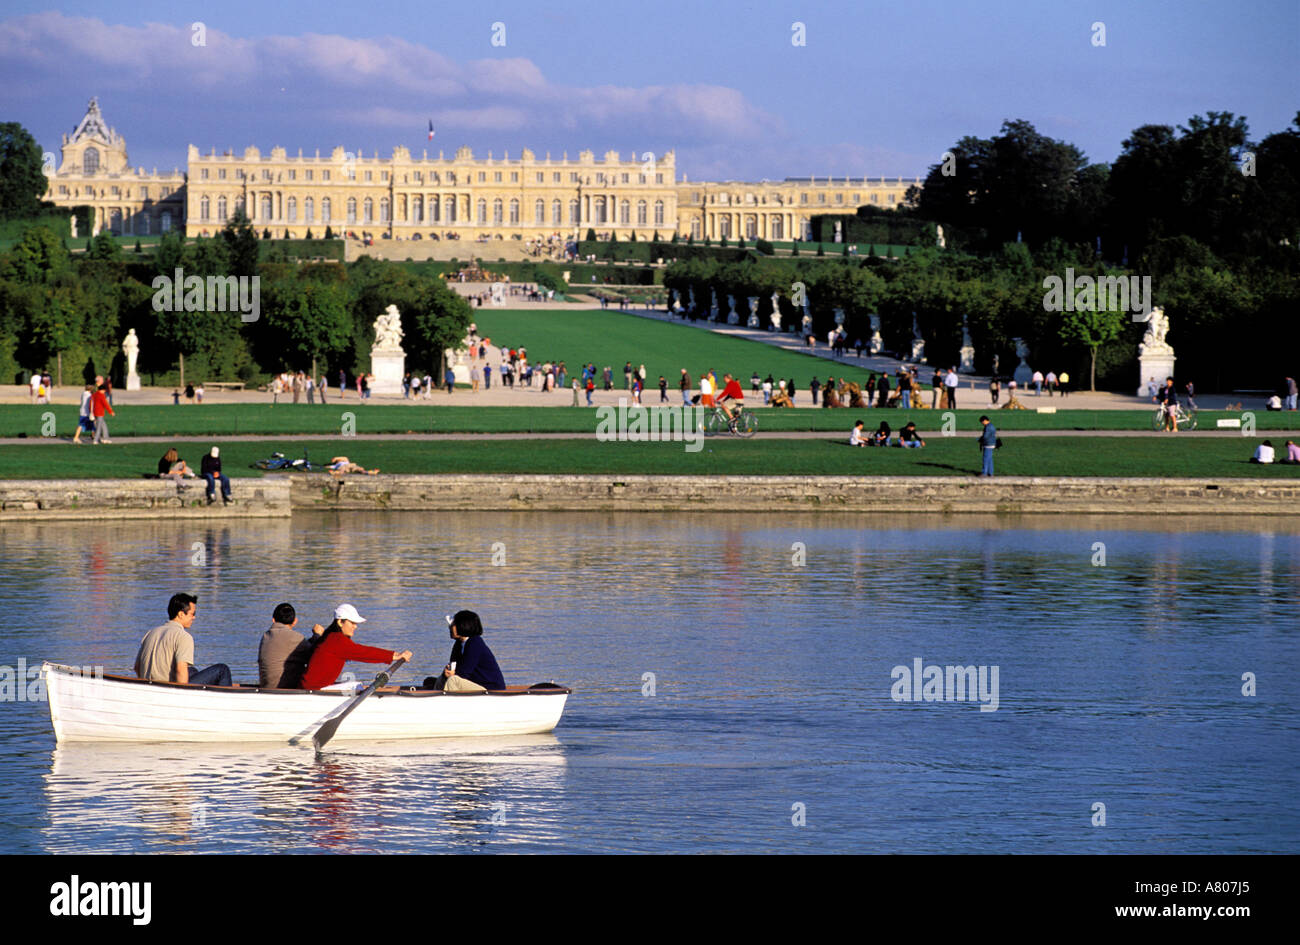 France, Yvelines, Versailles, Château de Versailles, rowboats on the Great Canal Stock Photo